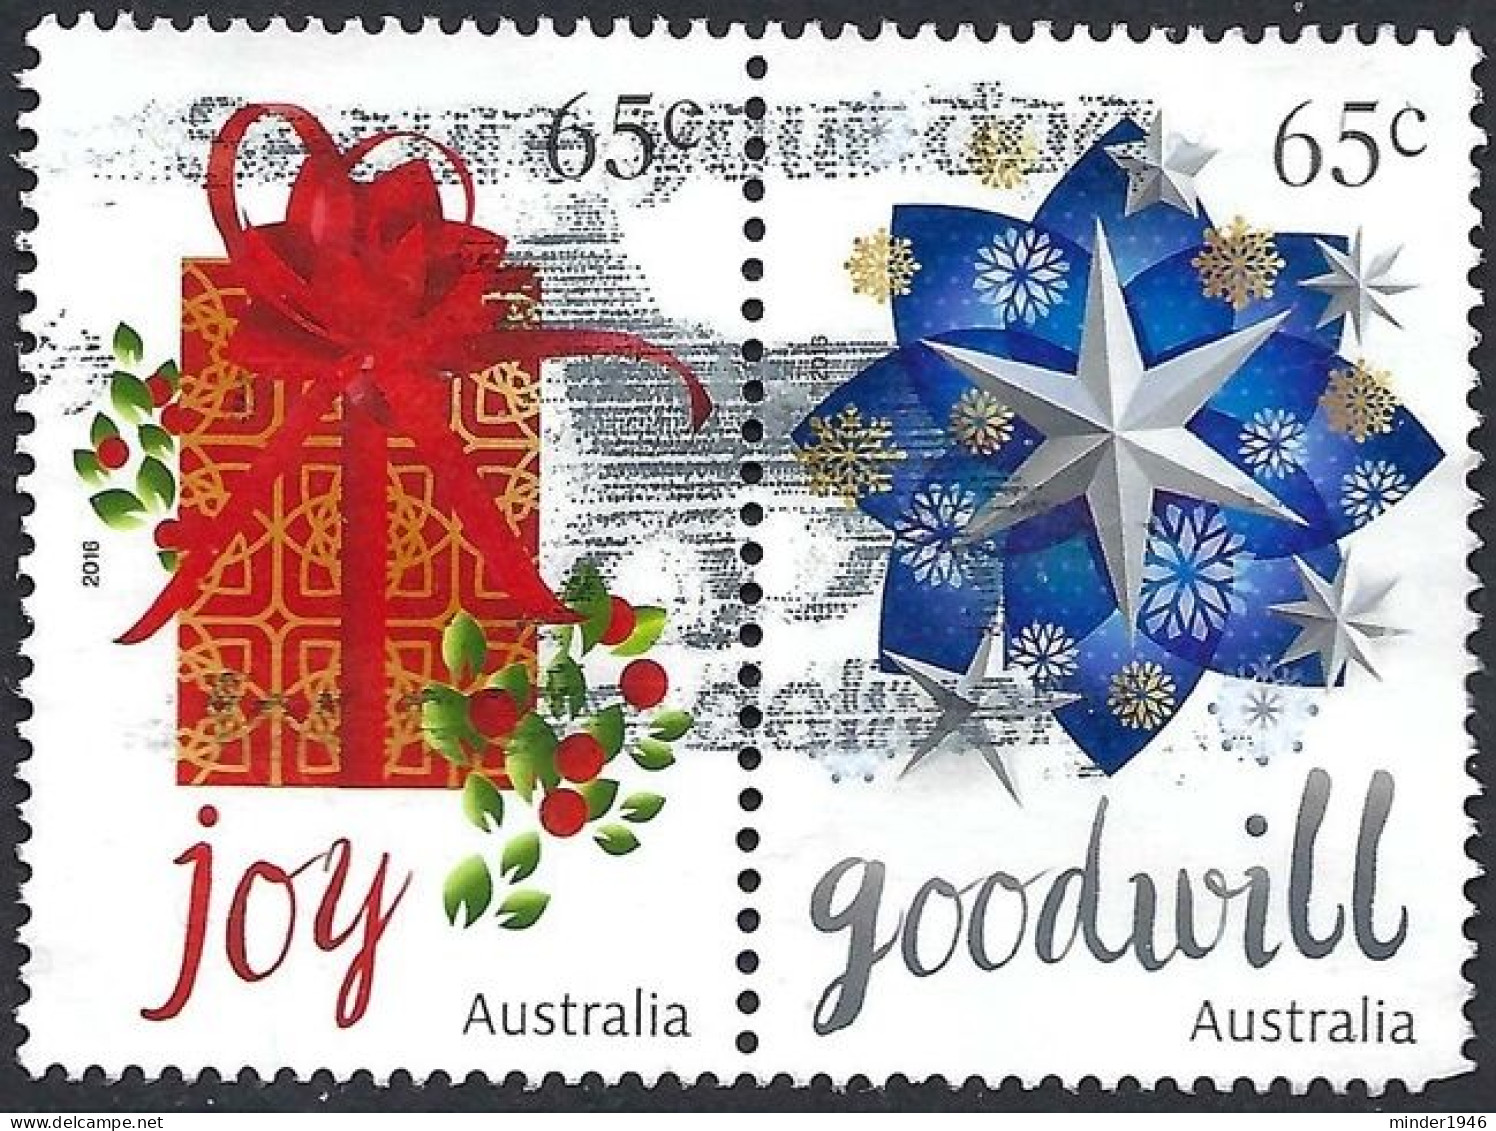 AUSTRALIA 2016 65c Multicoloured, Christmas-Goodwill Horizontal Joined Pair FU - Used Stamps